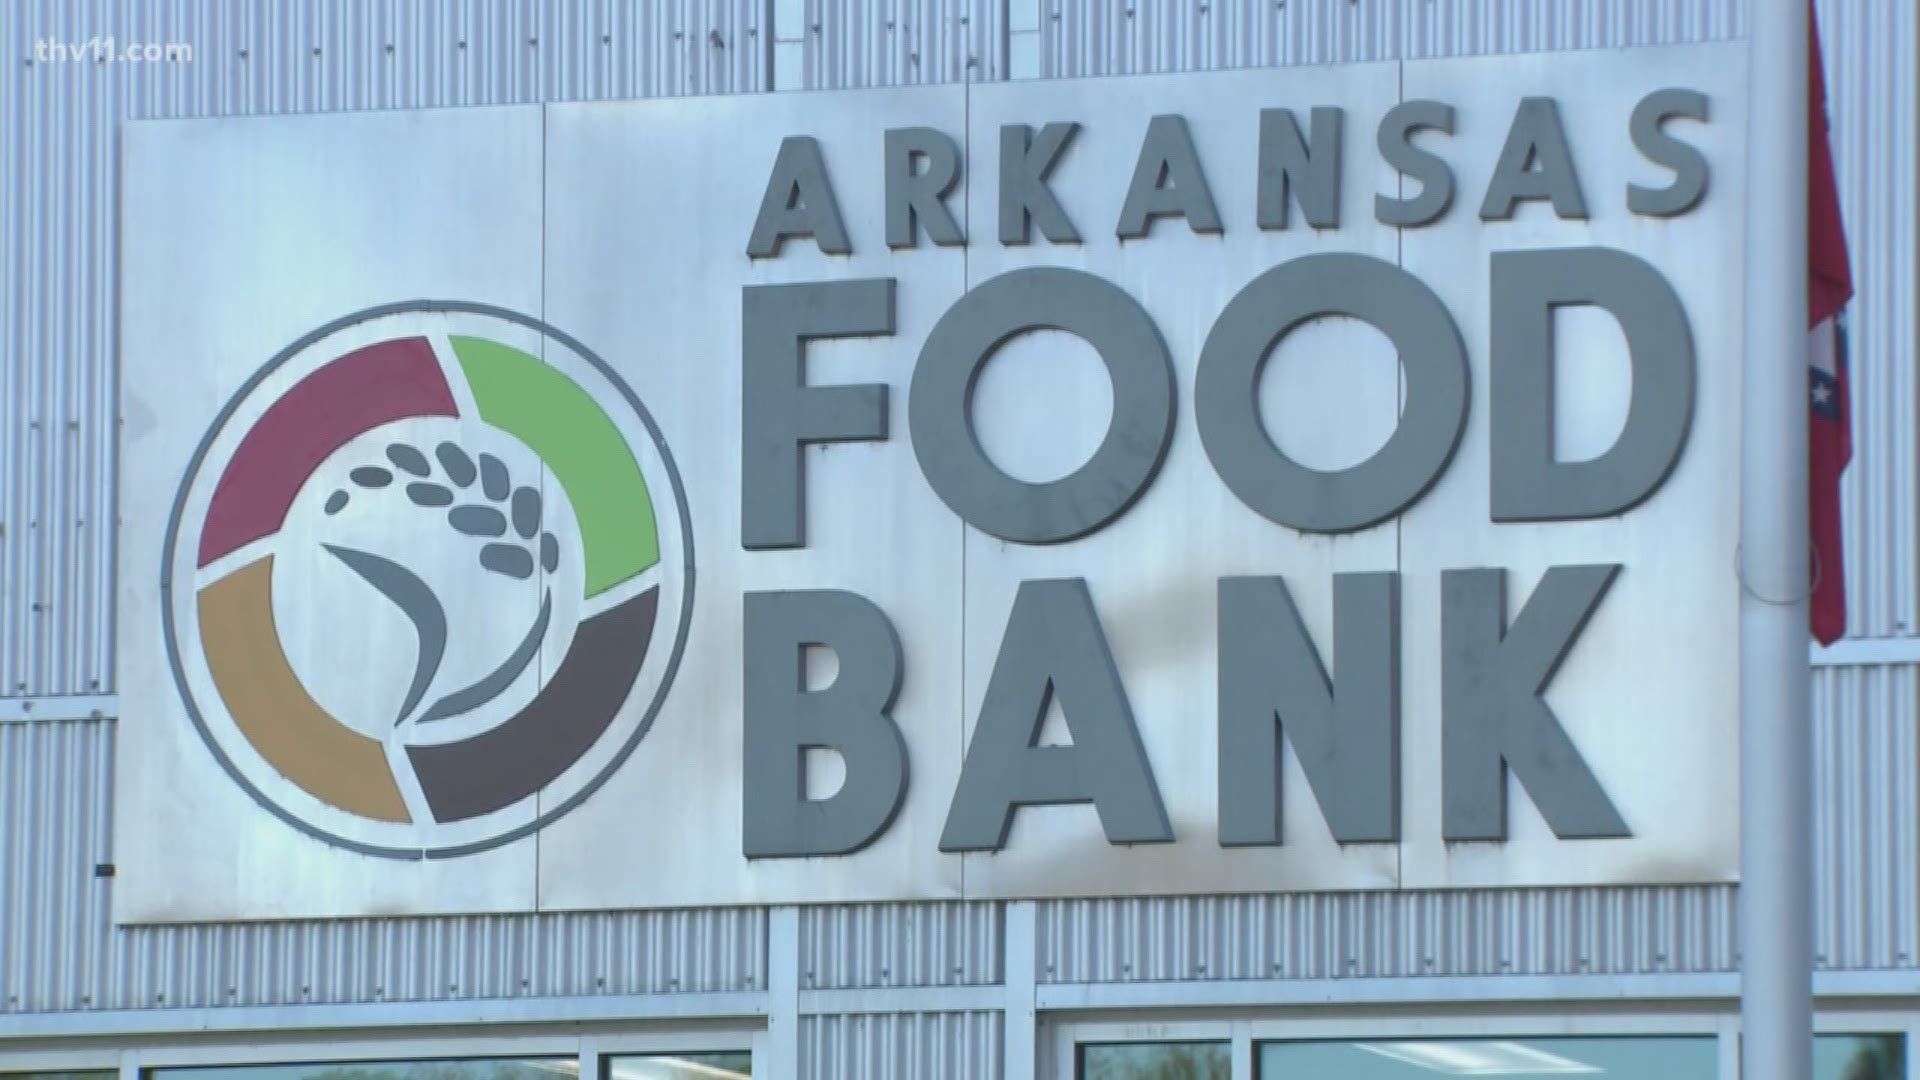 The Arkansas Food Bank is expanding in an effort to help better serve the community.